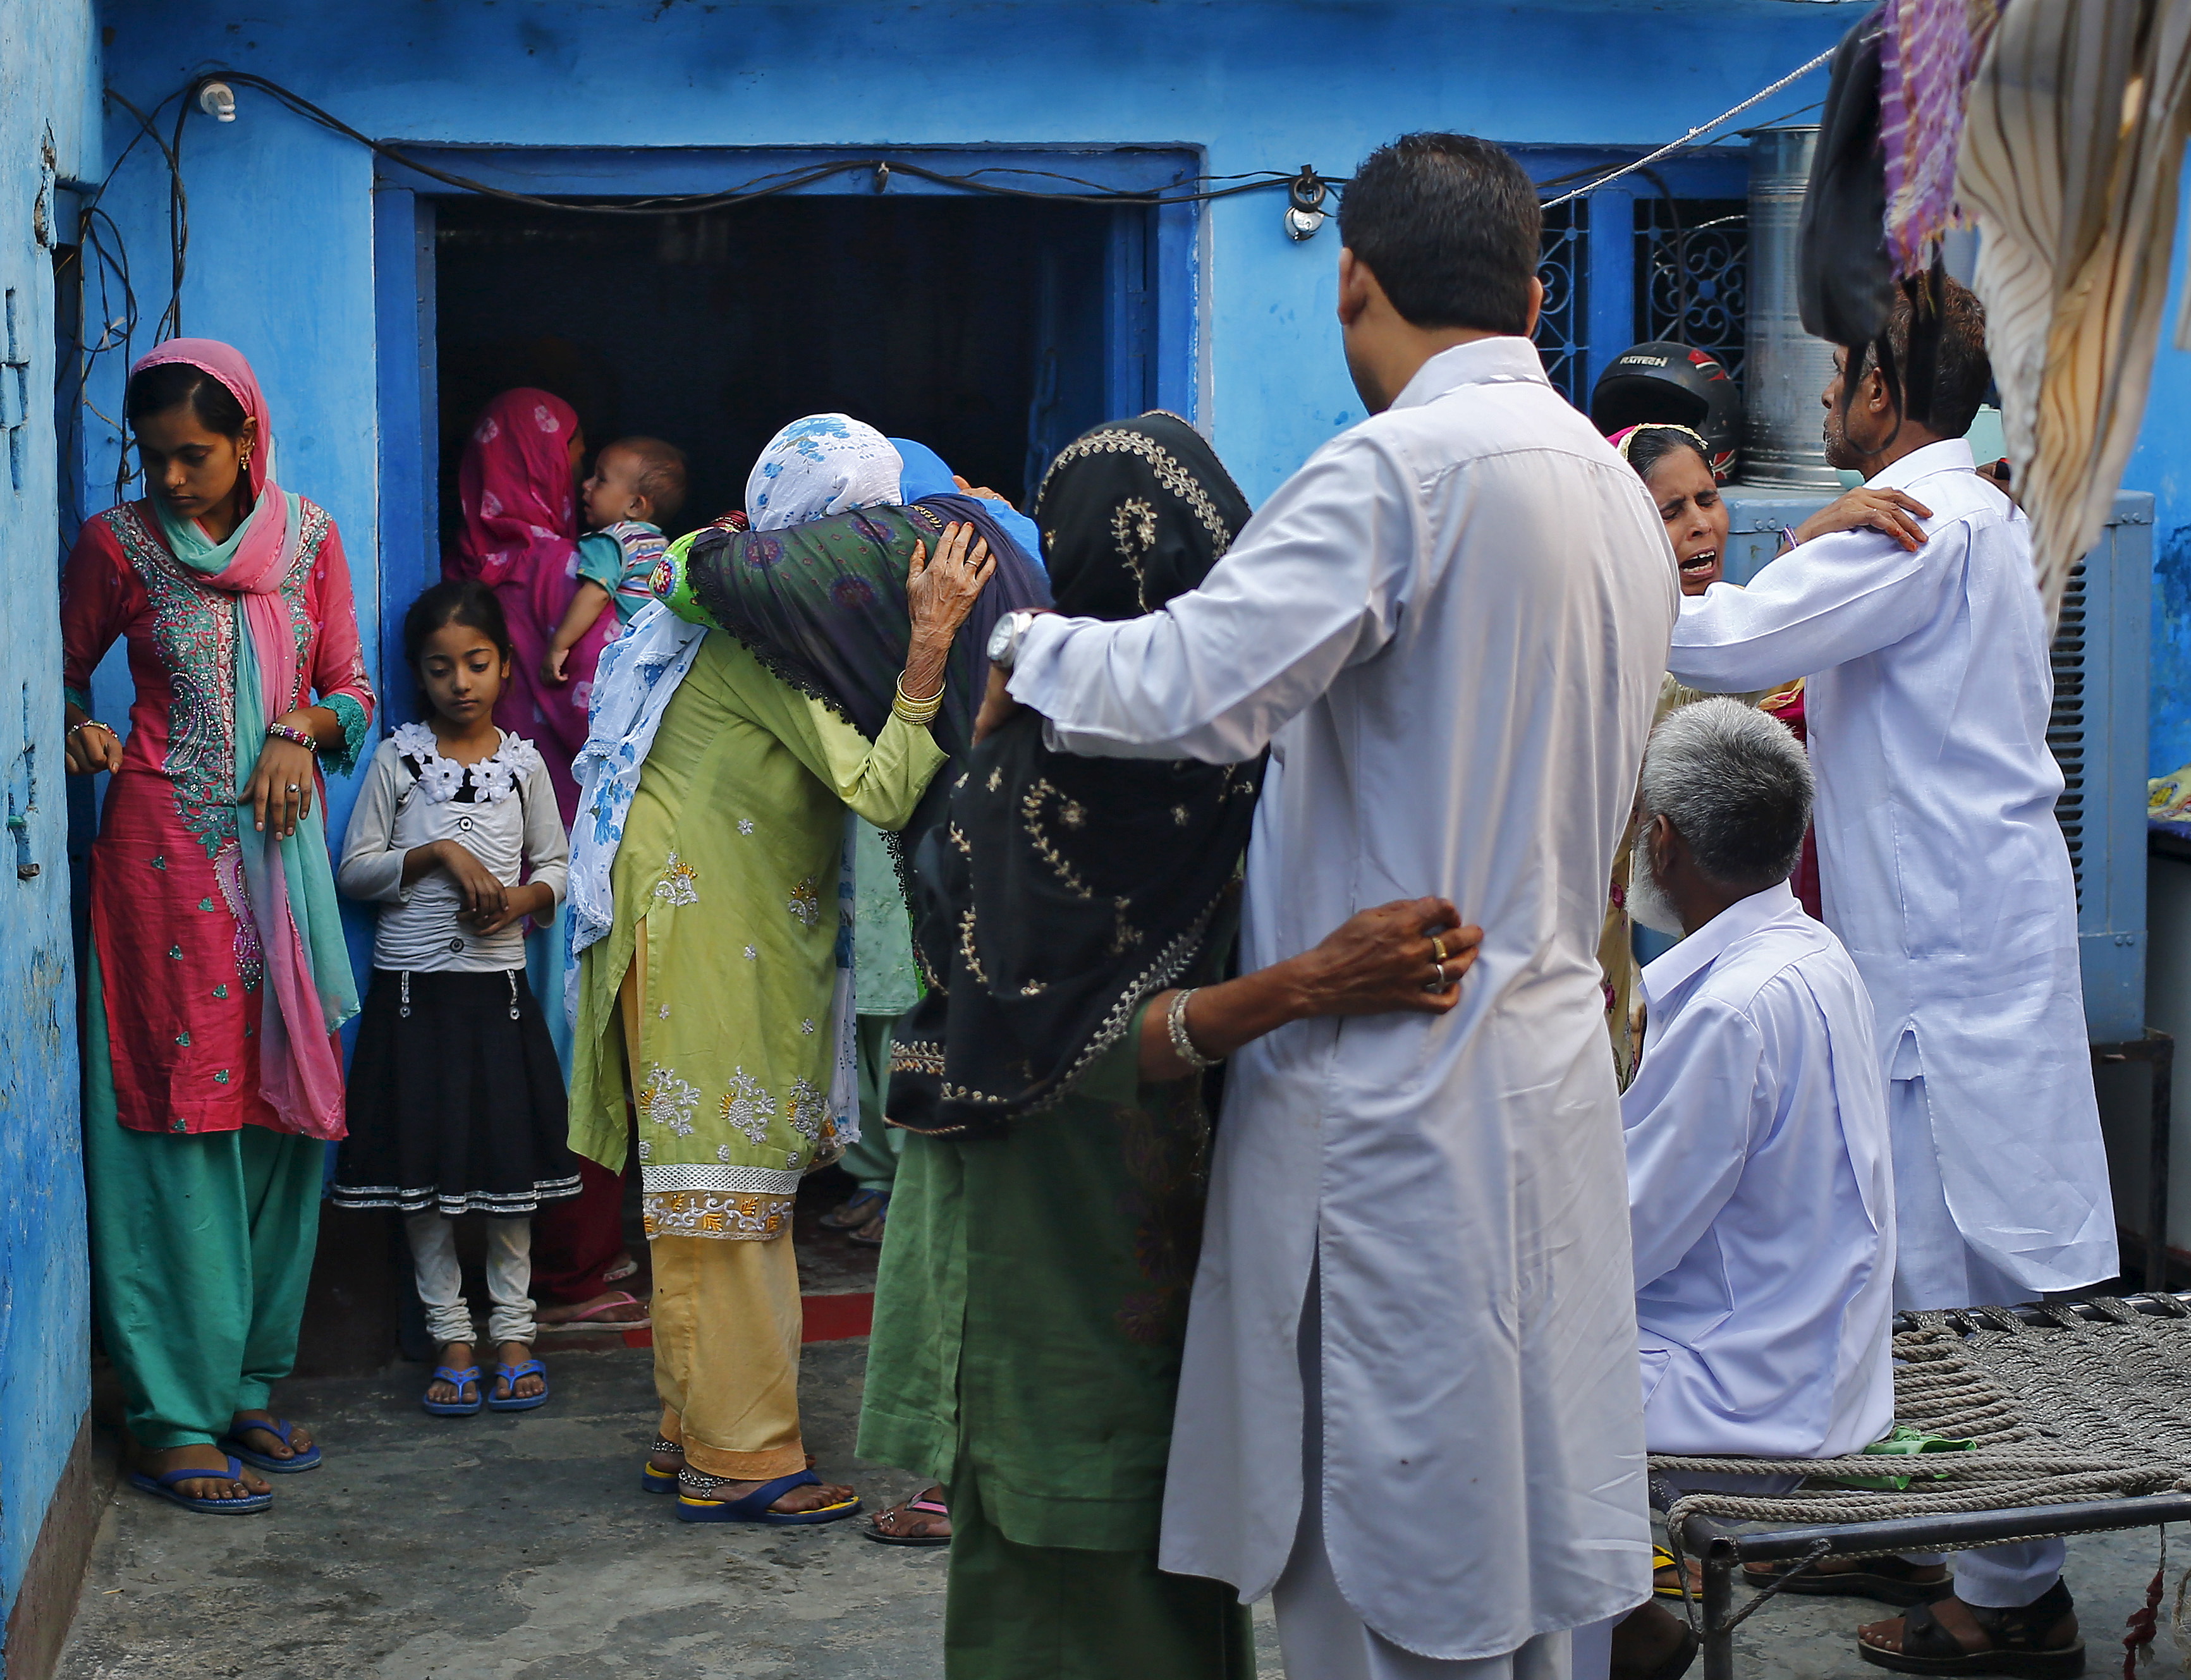 Relatives and family members of Mohammad Akhlaq, who was killed by a mob, mourn his death at Bisara village in Uttar Pradesh, India, on Oct. 2, 2015 (Anindito Mukherjee—Reuters)